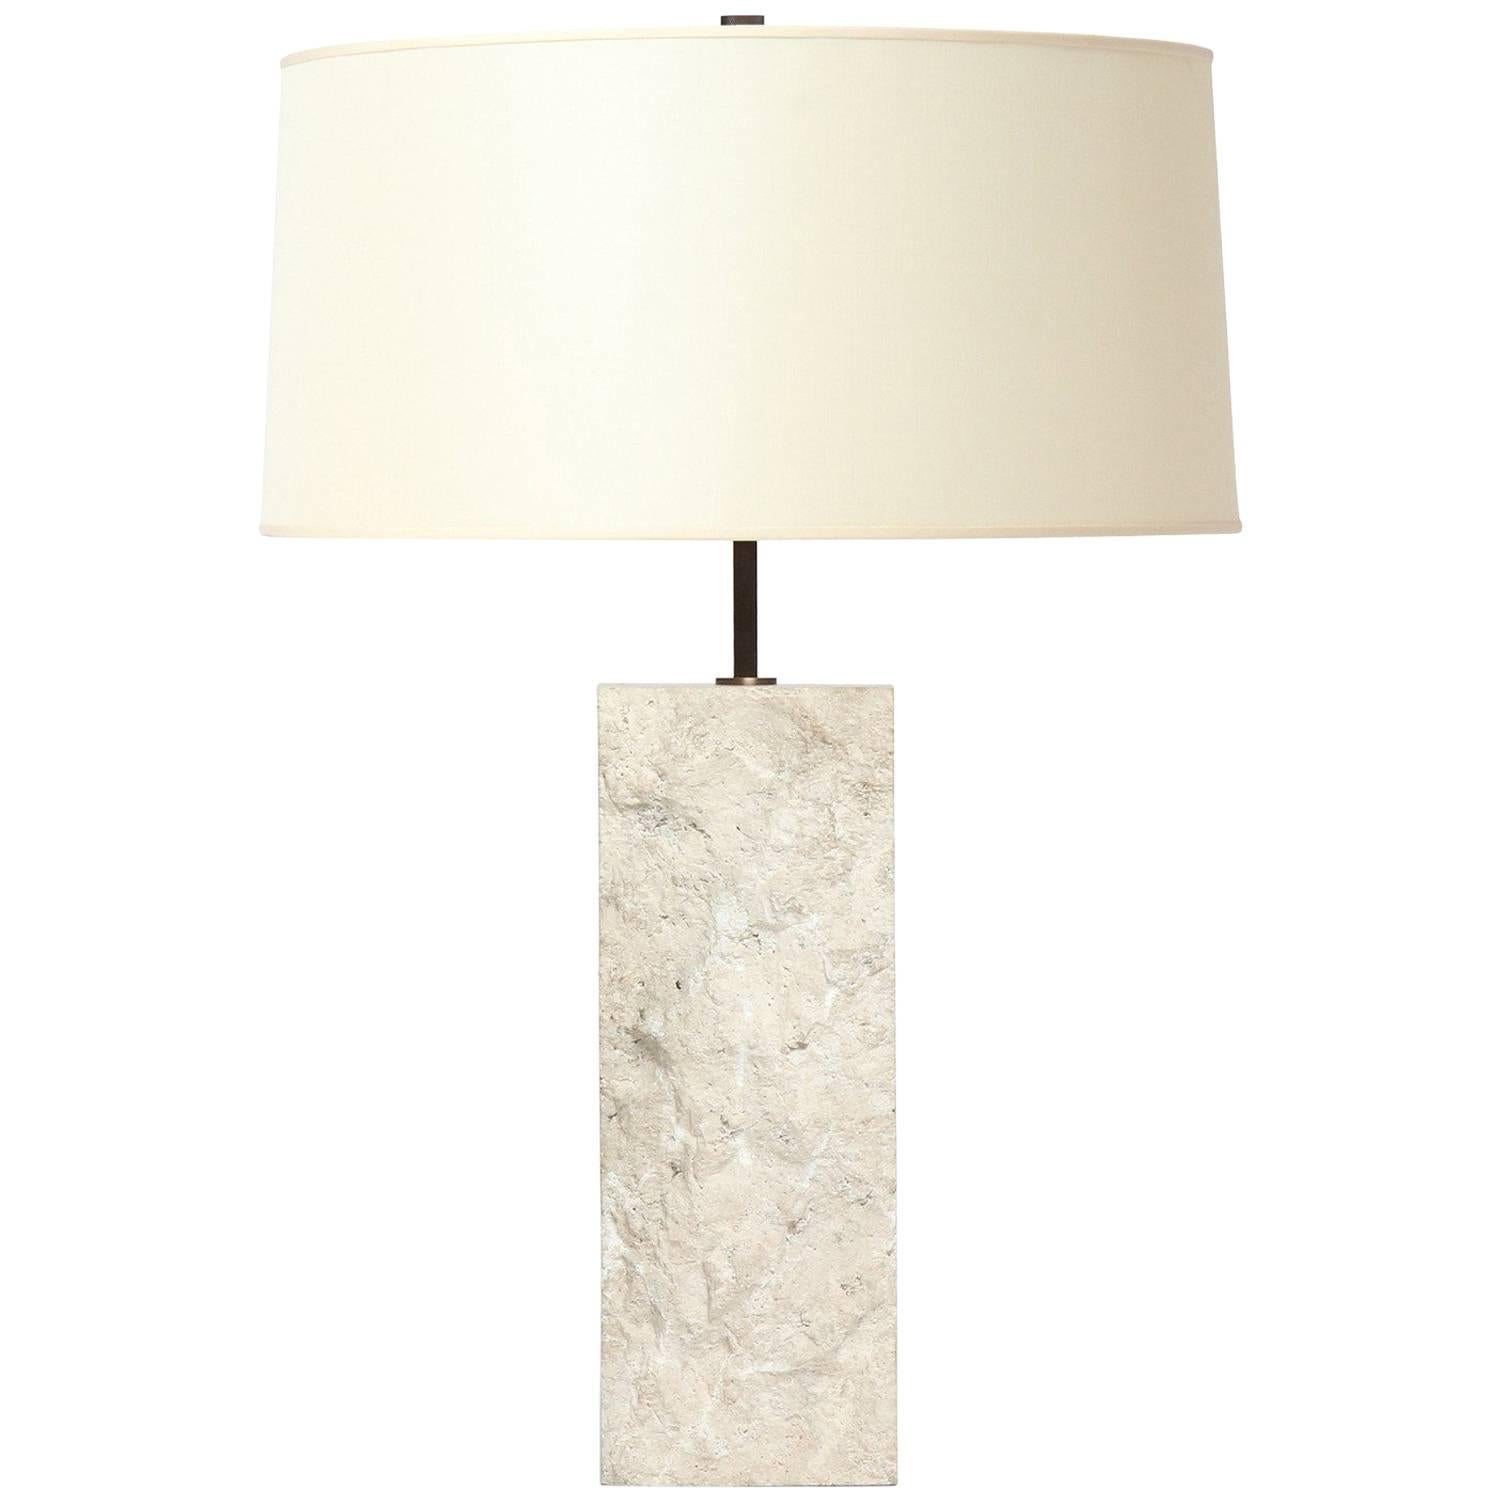 A substantial rectangular solid white limestone table lamp with textural chiseled surface.
The body of the lamp measures 15.75